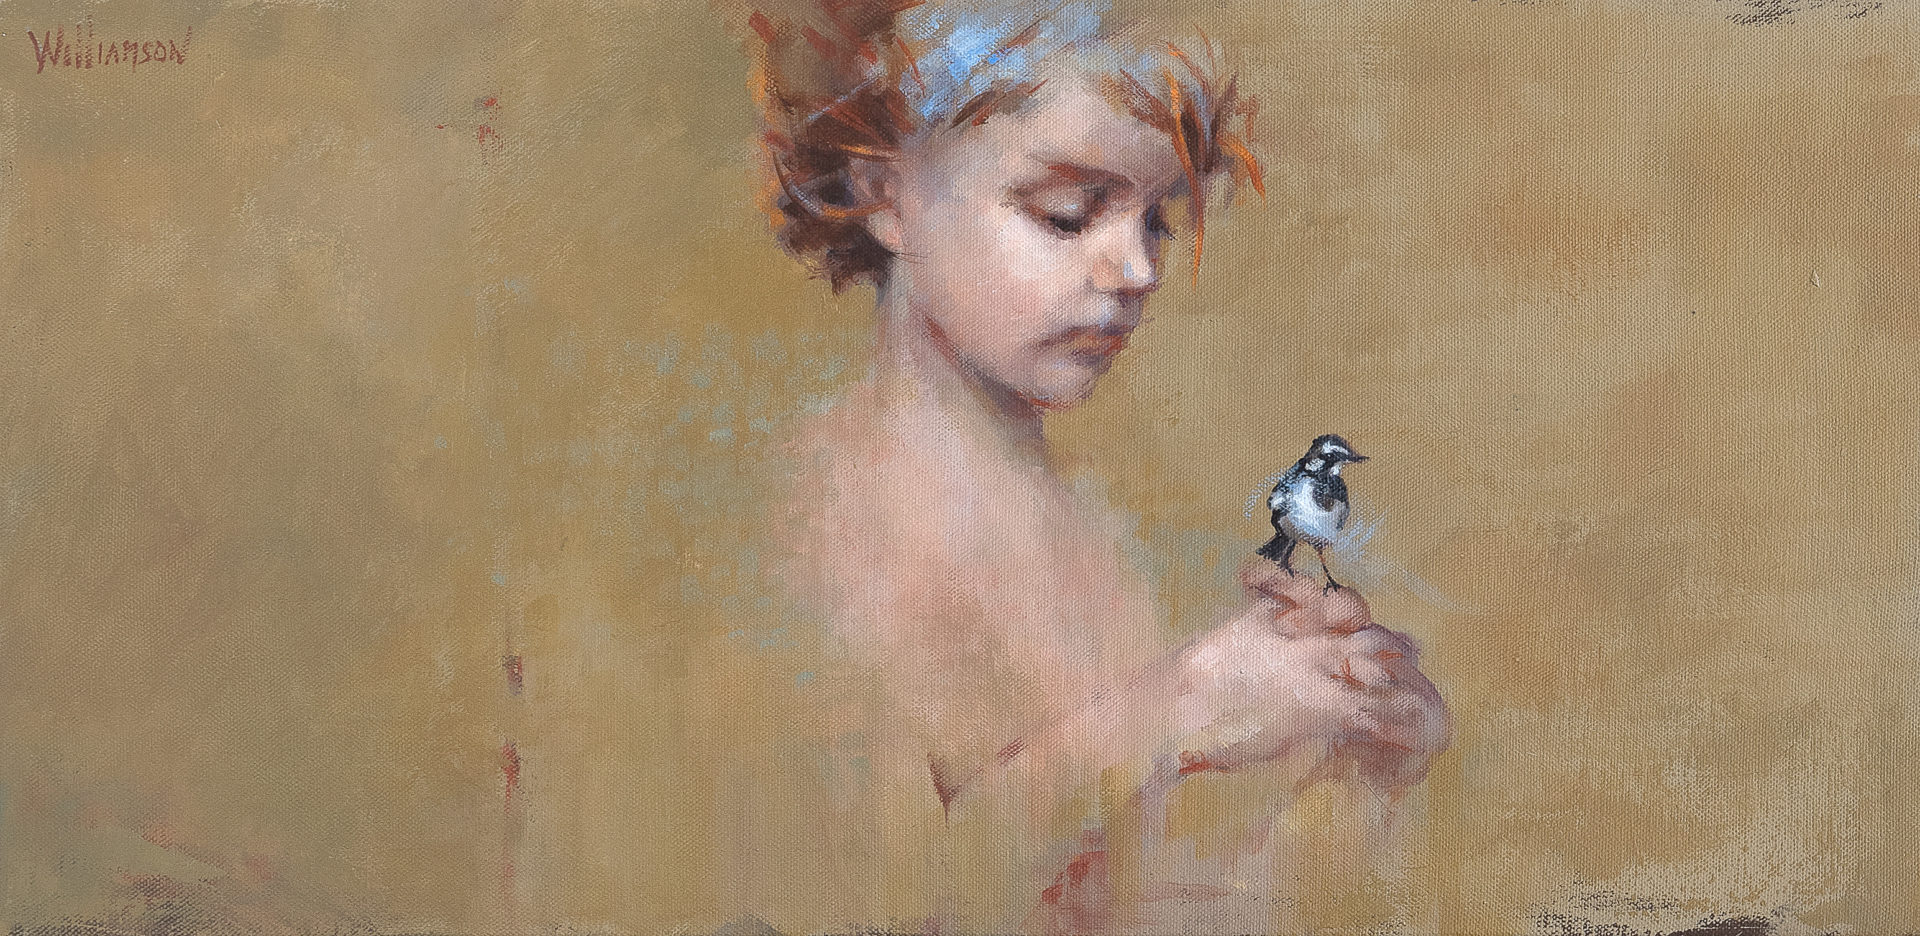 Girl with Bluebird | Jan Williamson | Oil on canvas | 30 x 60 cm | SOLD